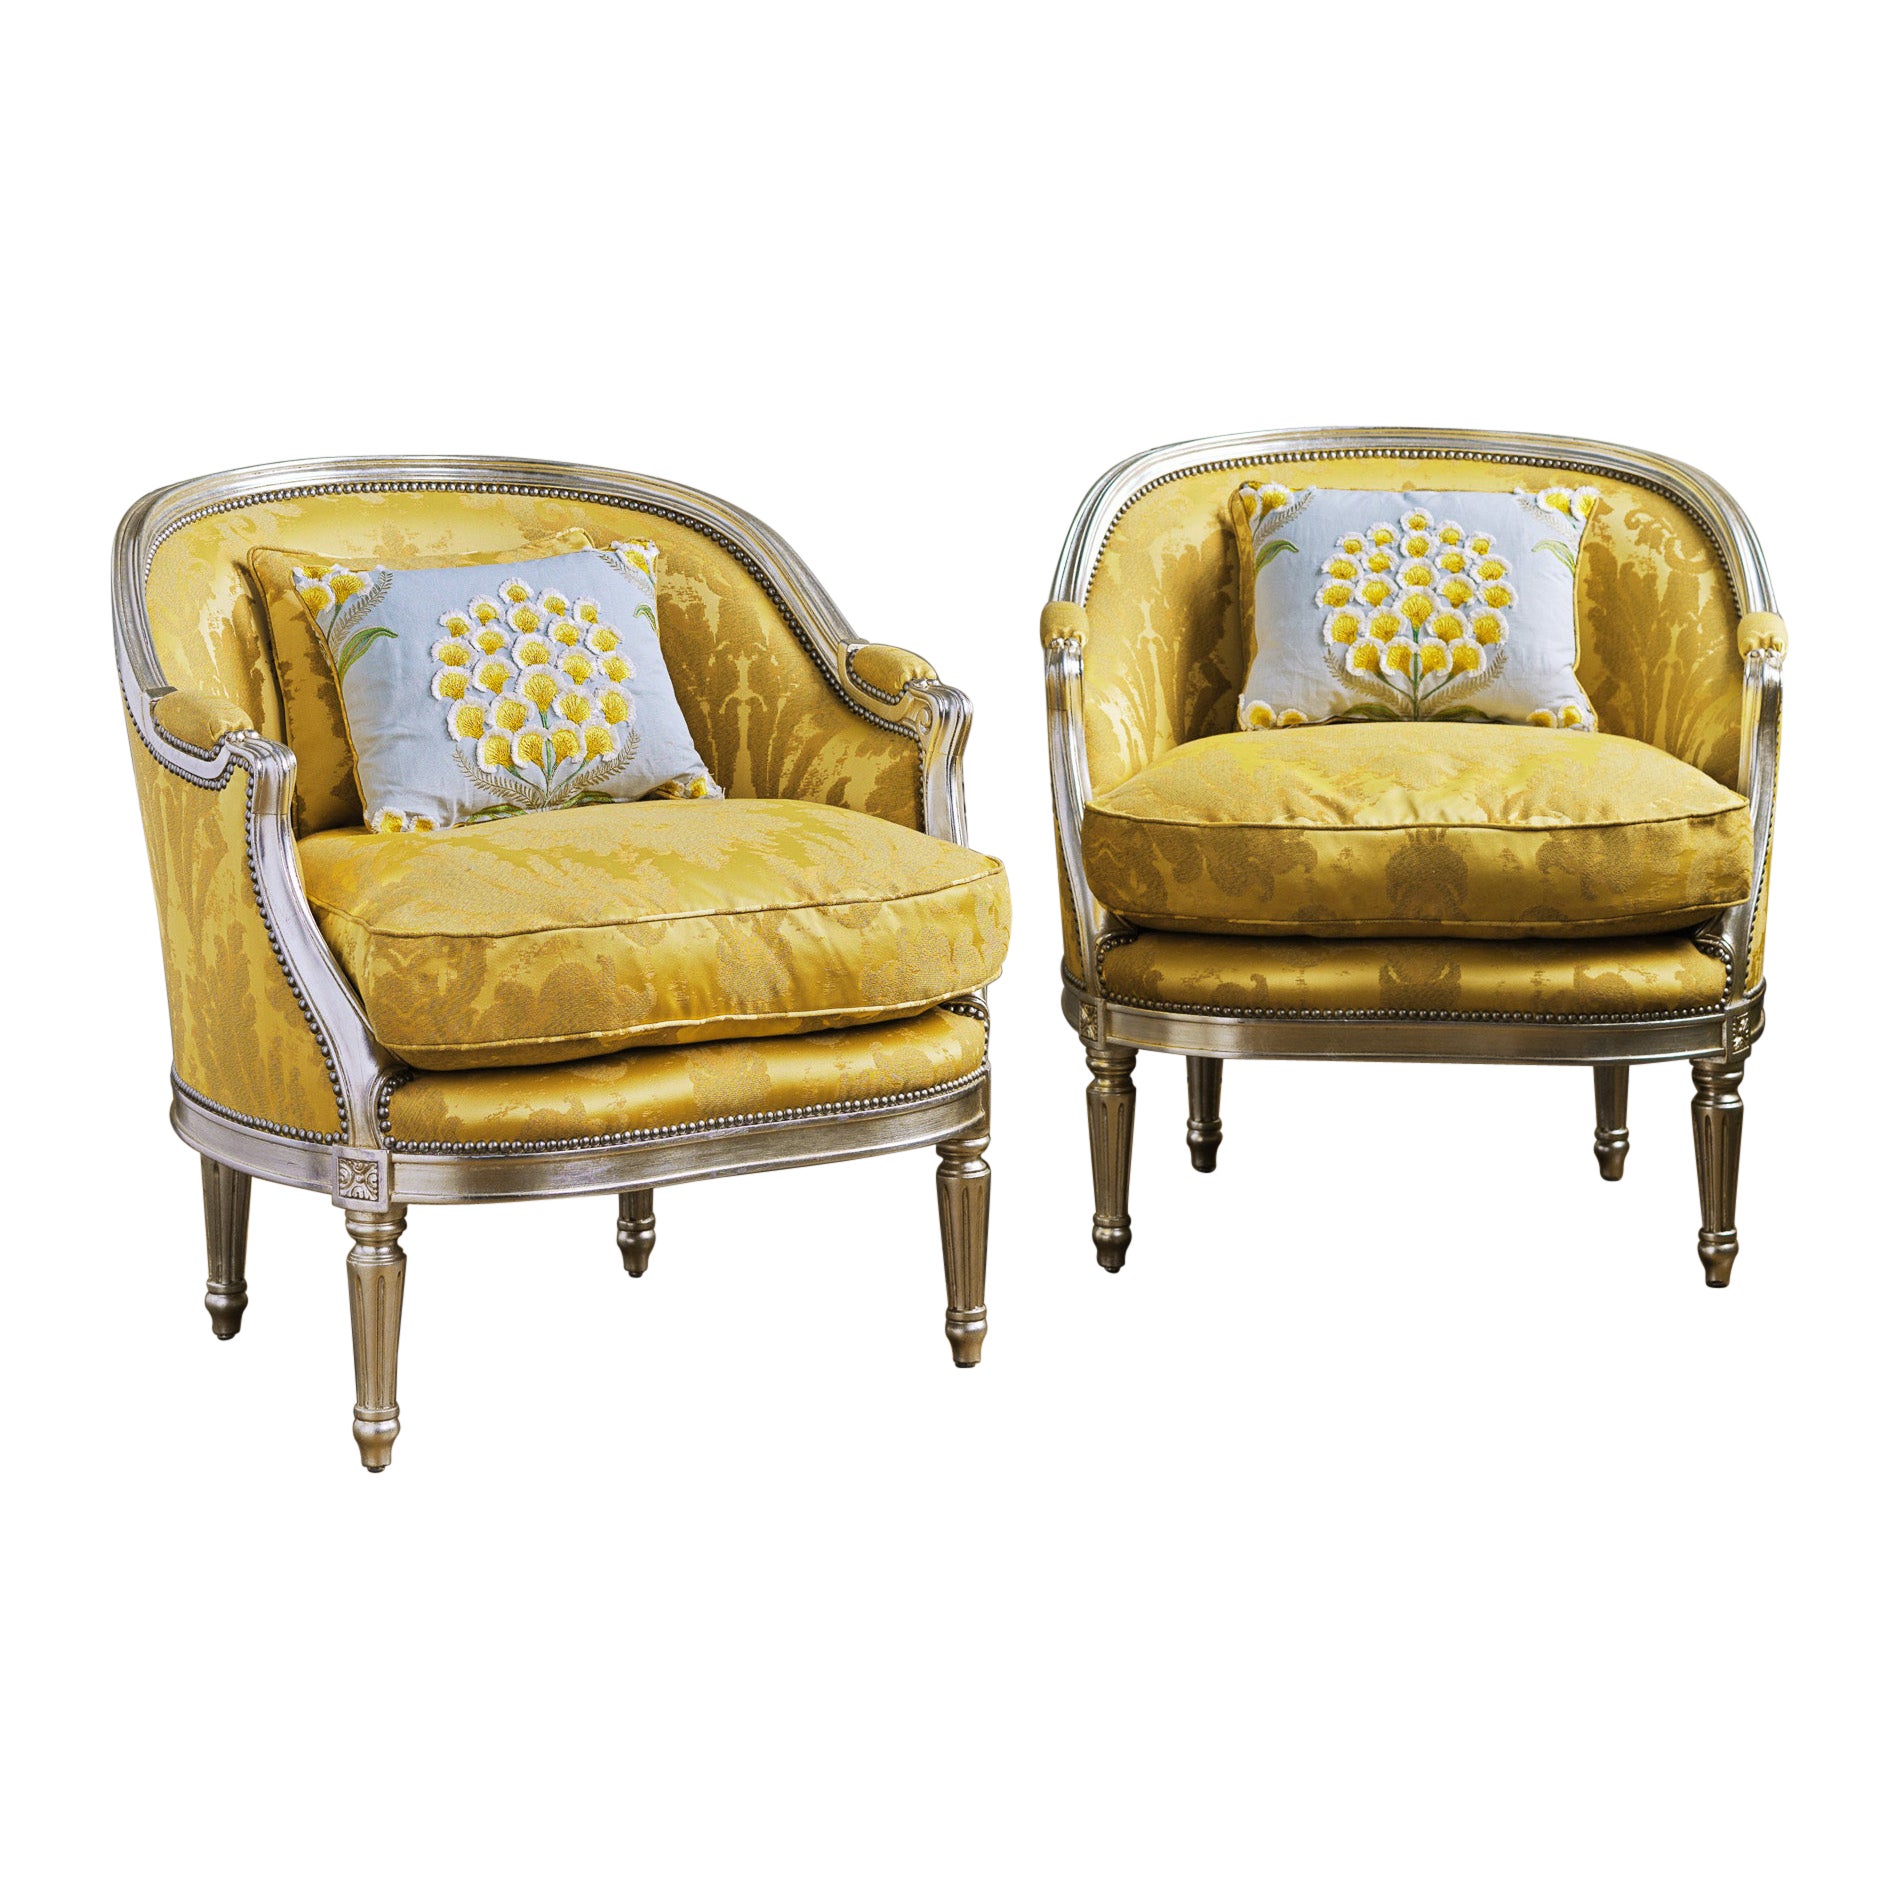 Pair of Silver Gilt Wood Hollywood Regency Style Marquise Armchairs